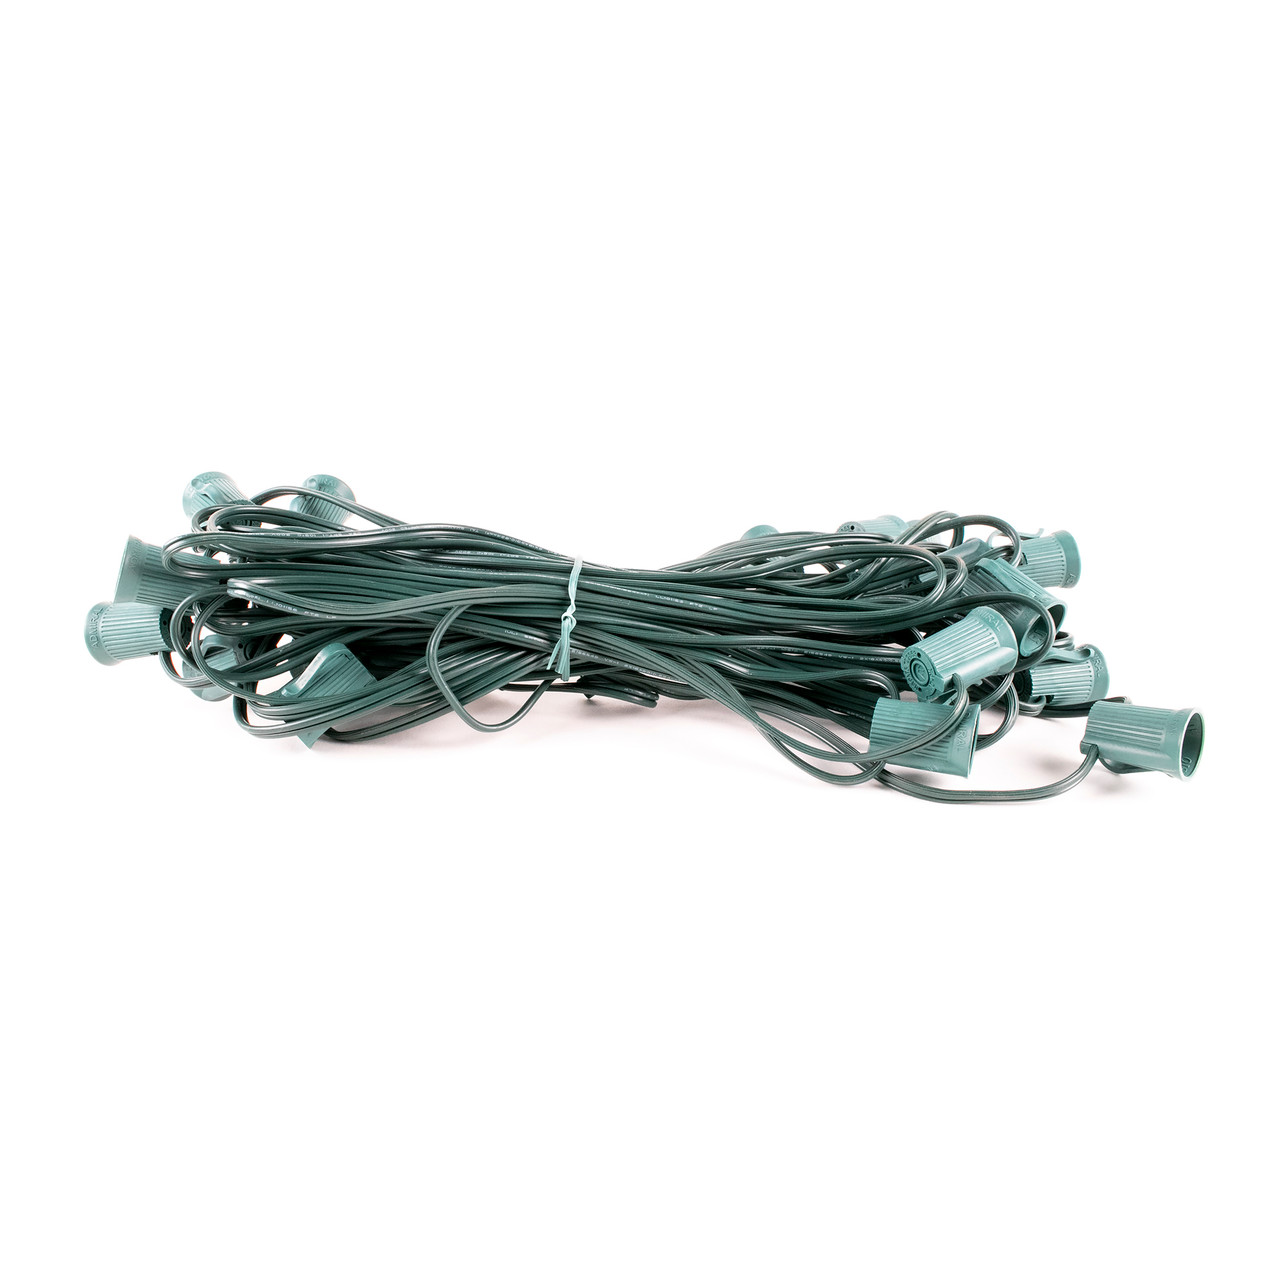 25' C9 Light String - Green Wire - 25 Sockets - 12 Spacing